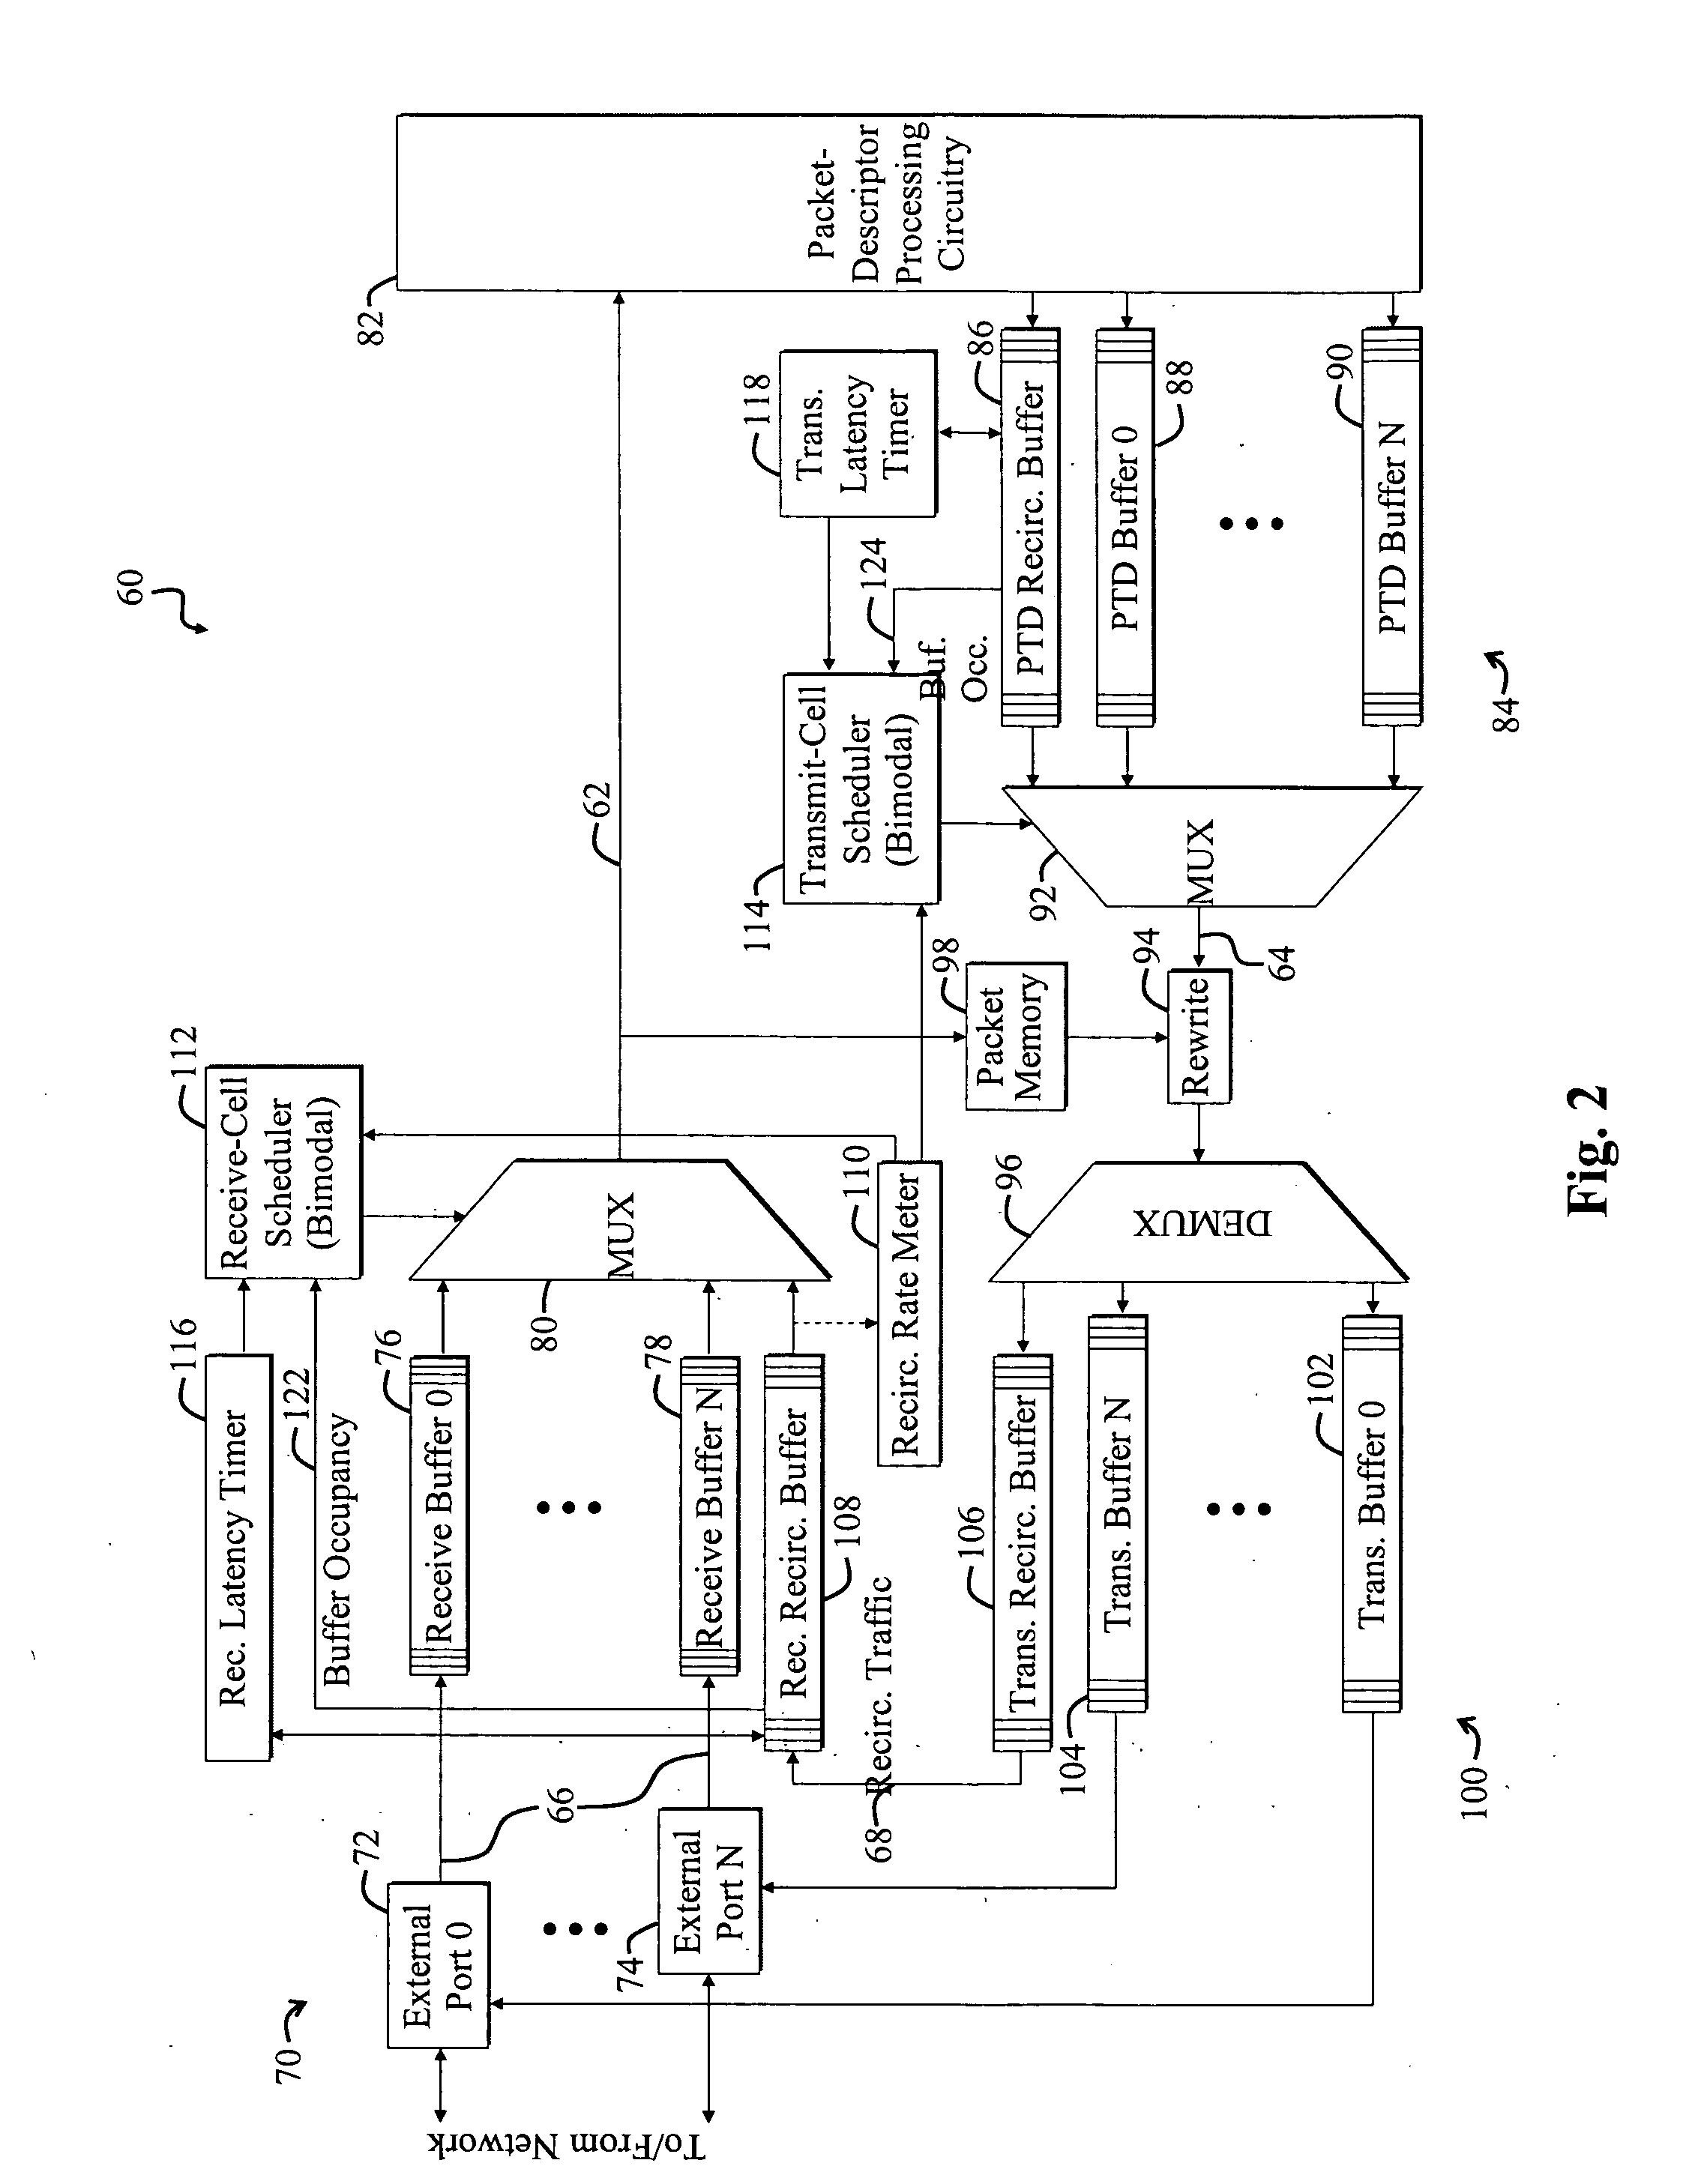 System and method for managing bandwidth